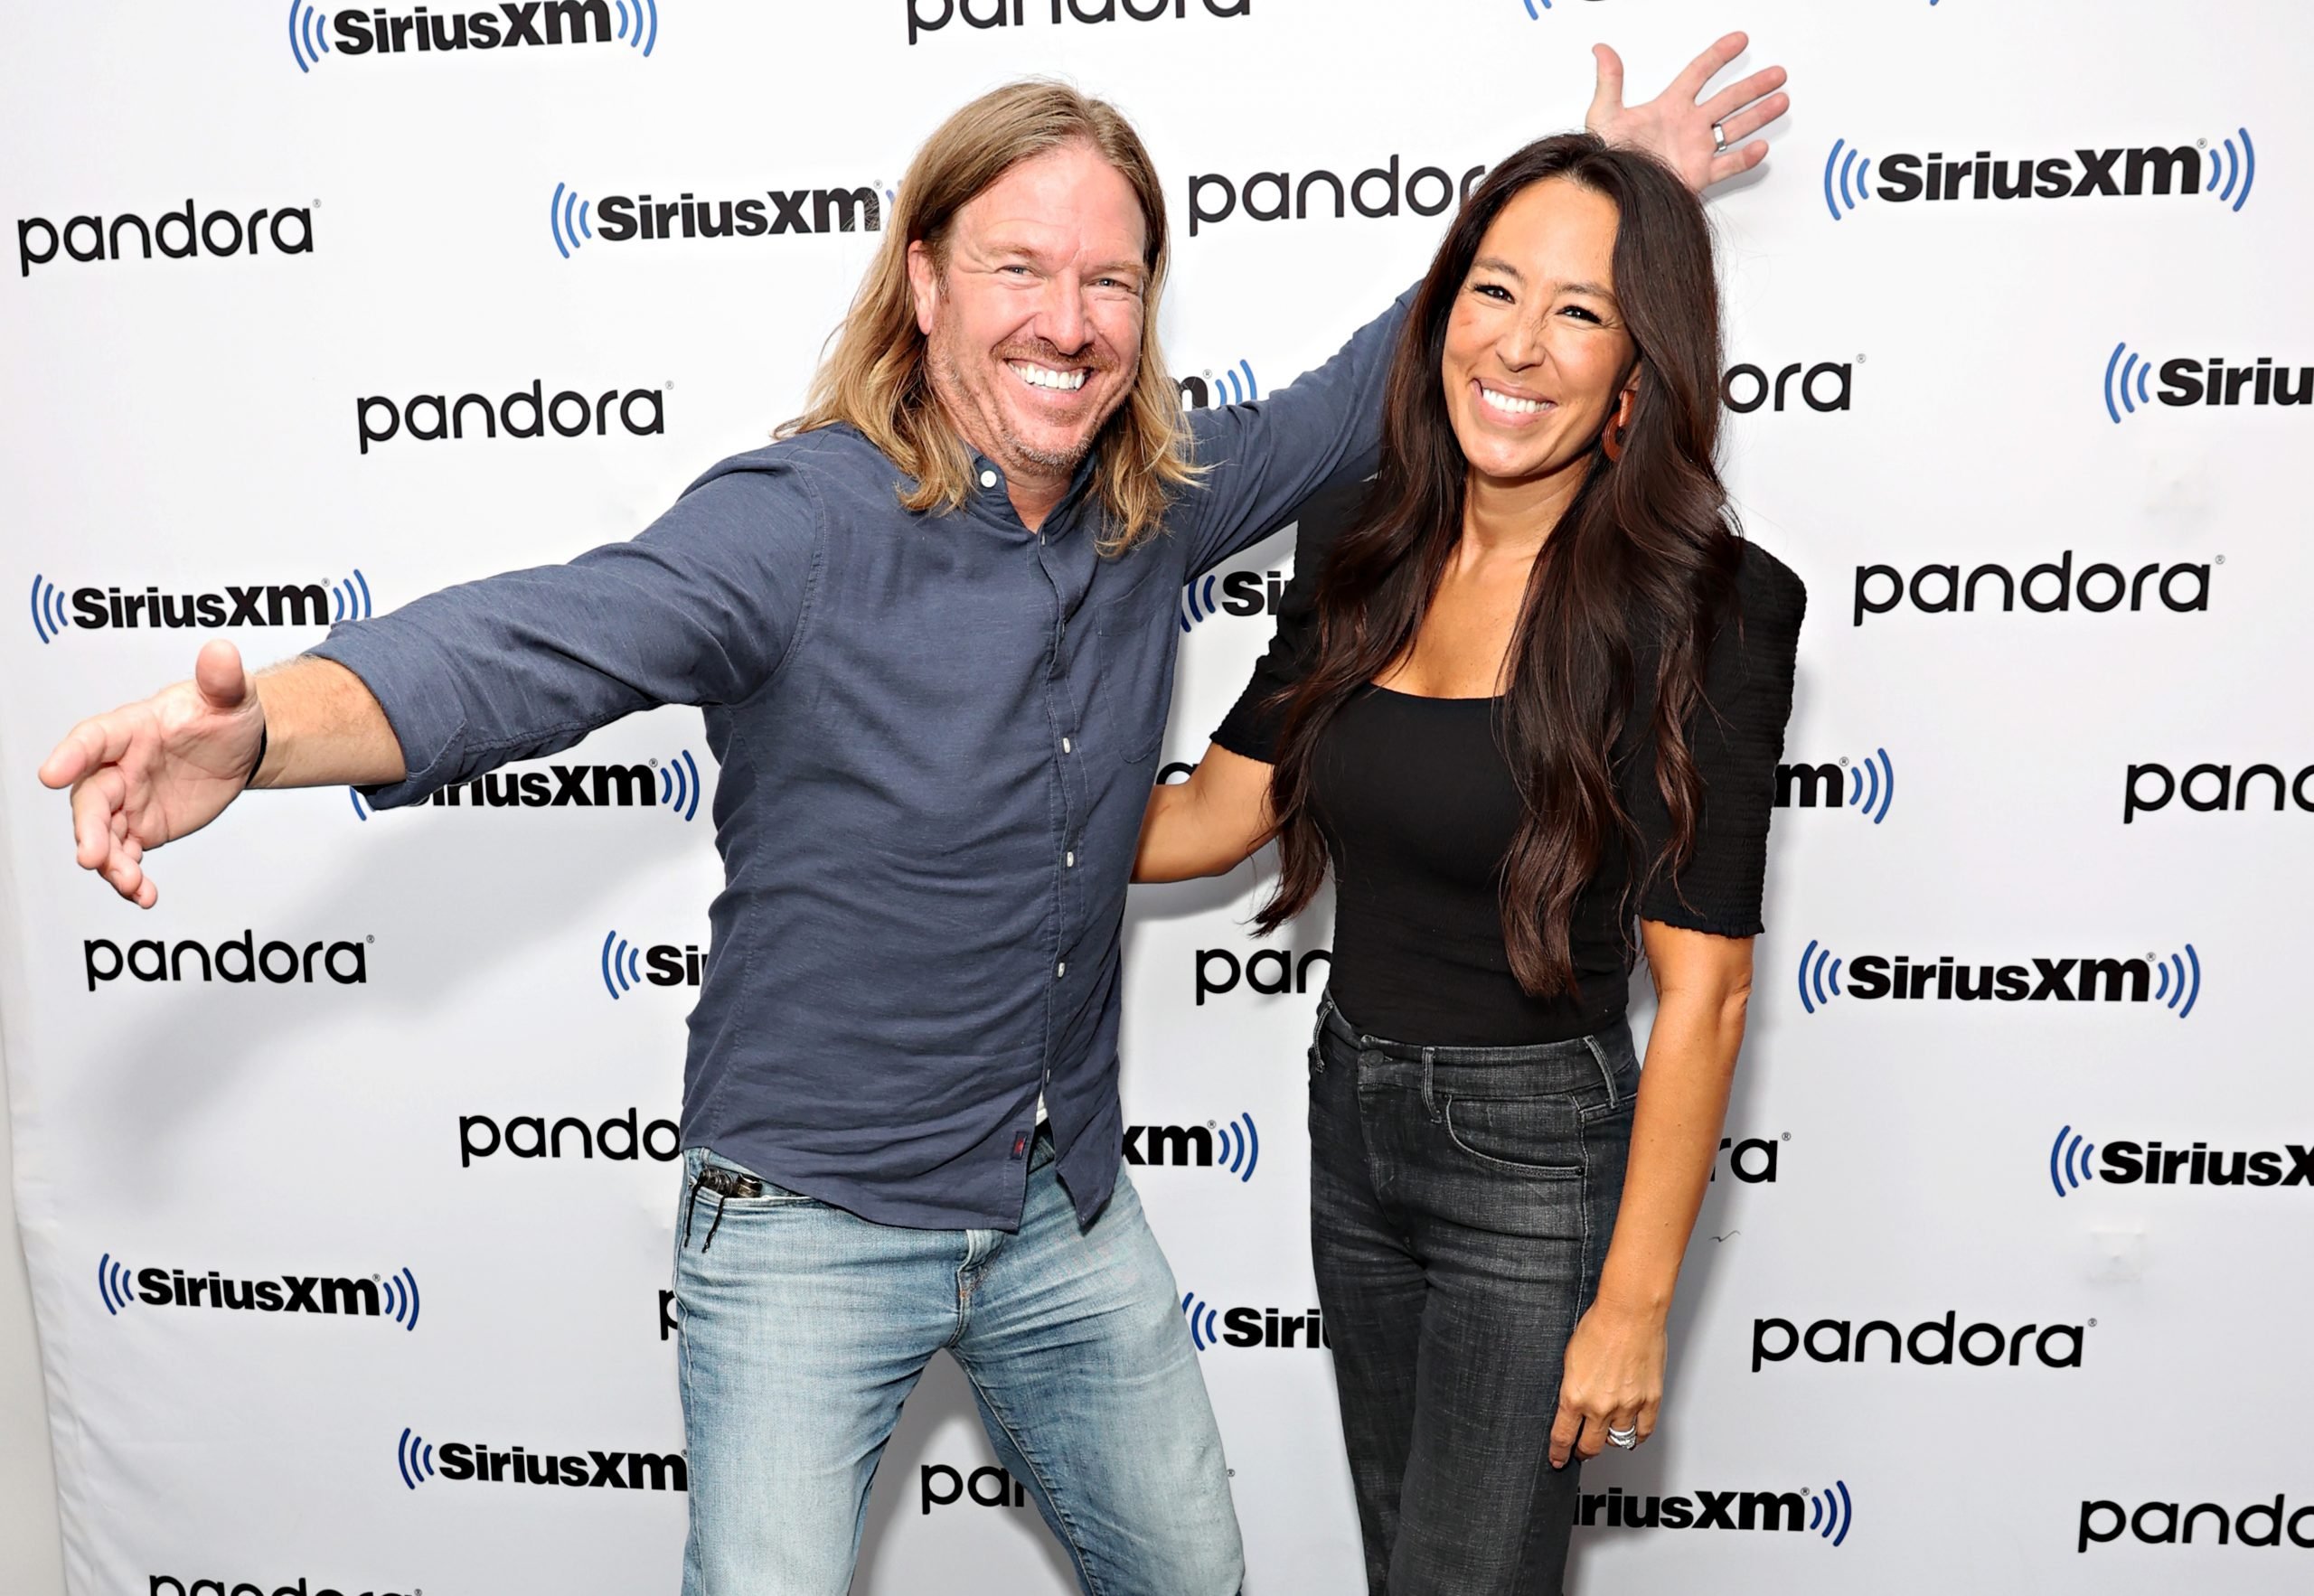 Chip Gaines and Joanna Gaines pose together during their visit to SiriusXM Studios